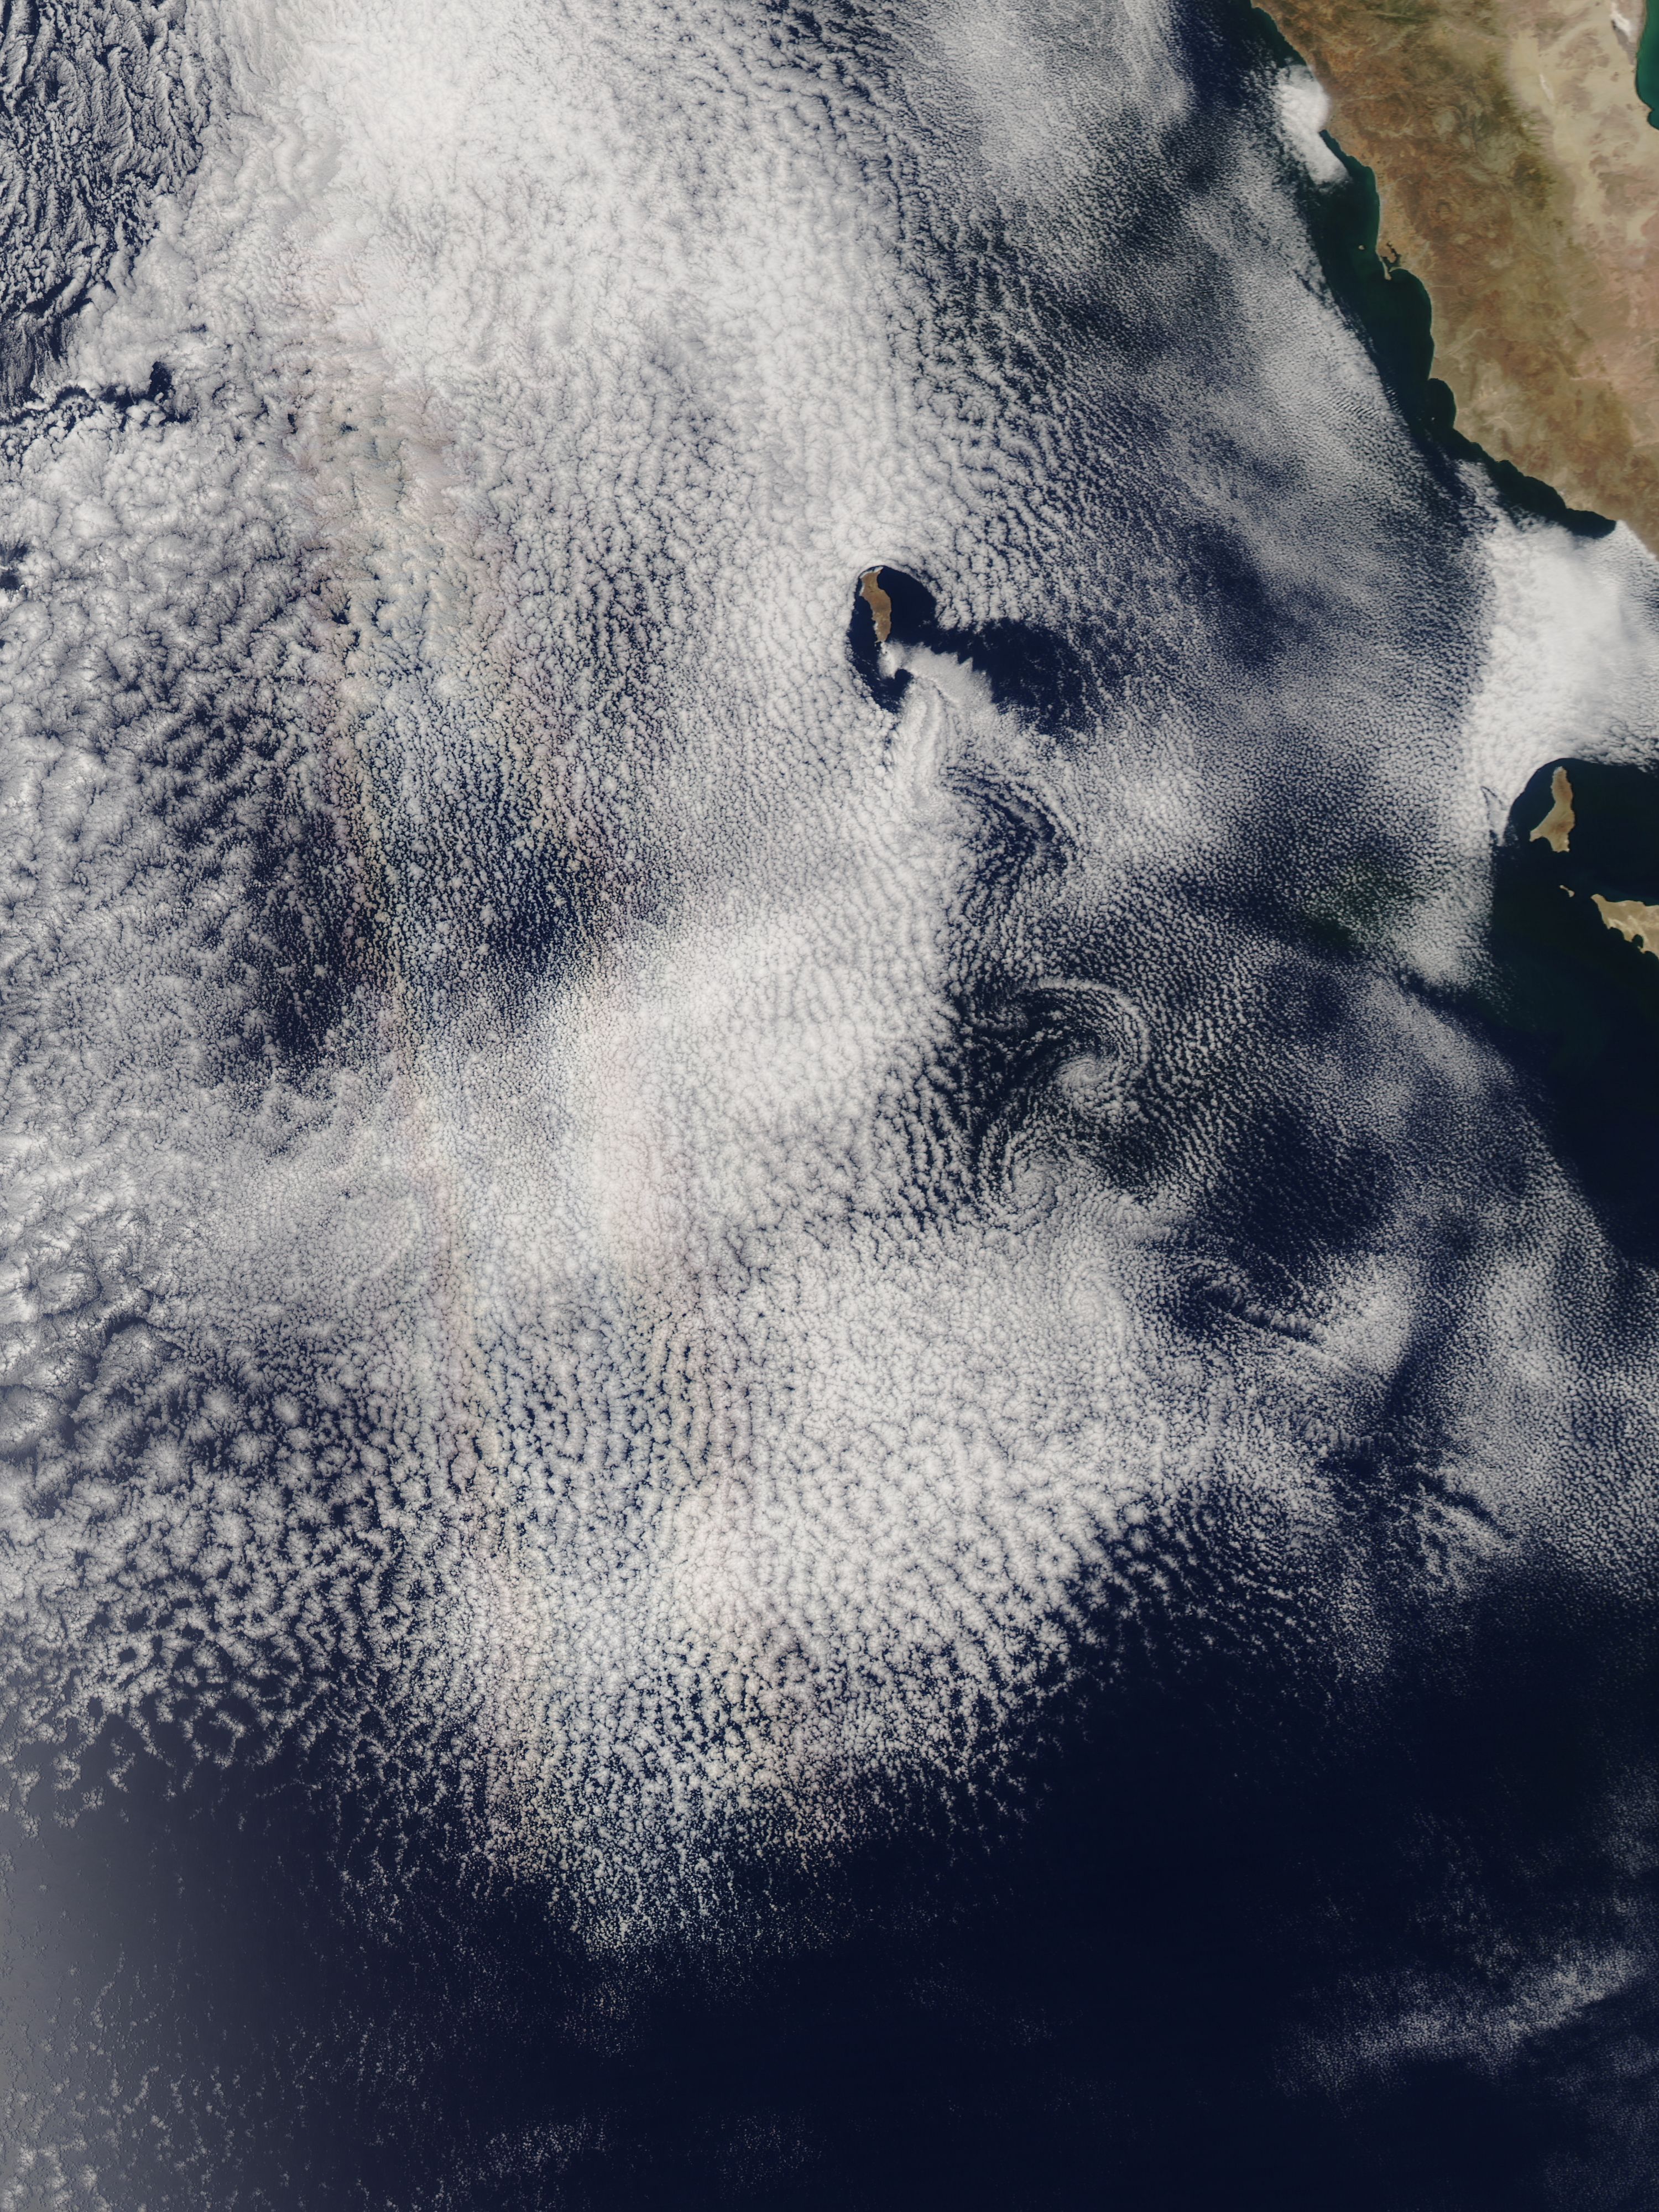 Vortex Street and Glory off Guadalupe Island, Mexico - related image preview